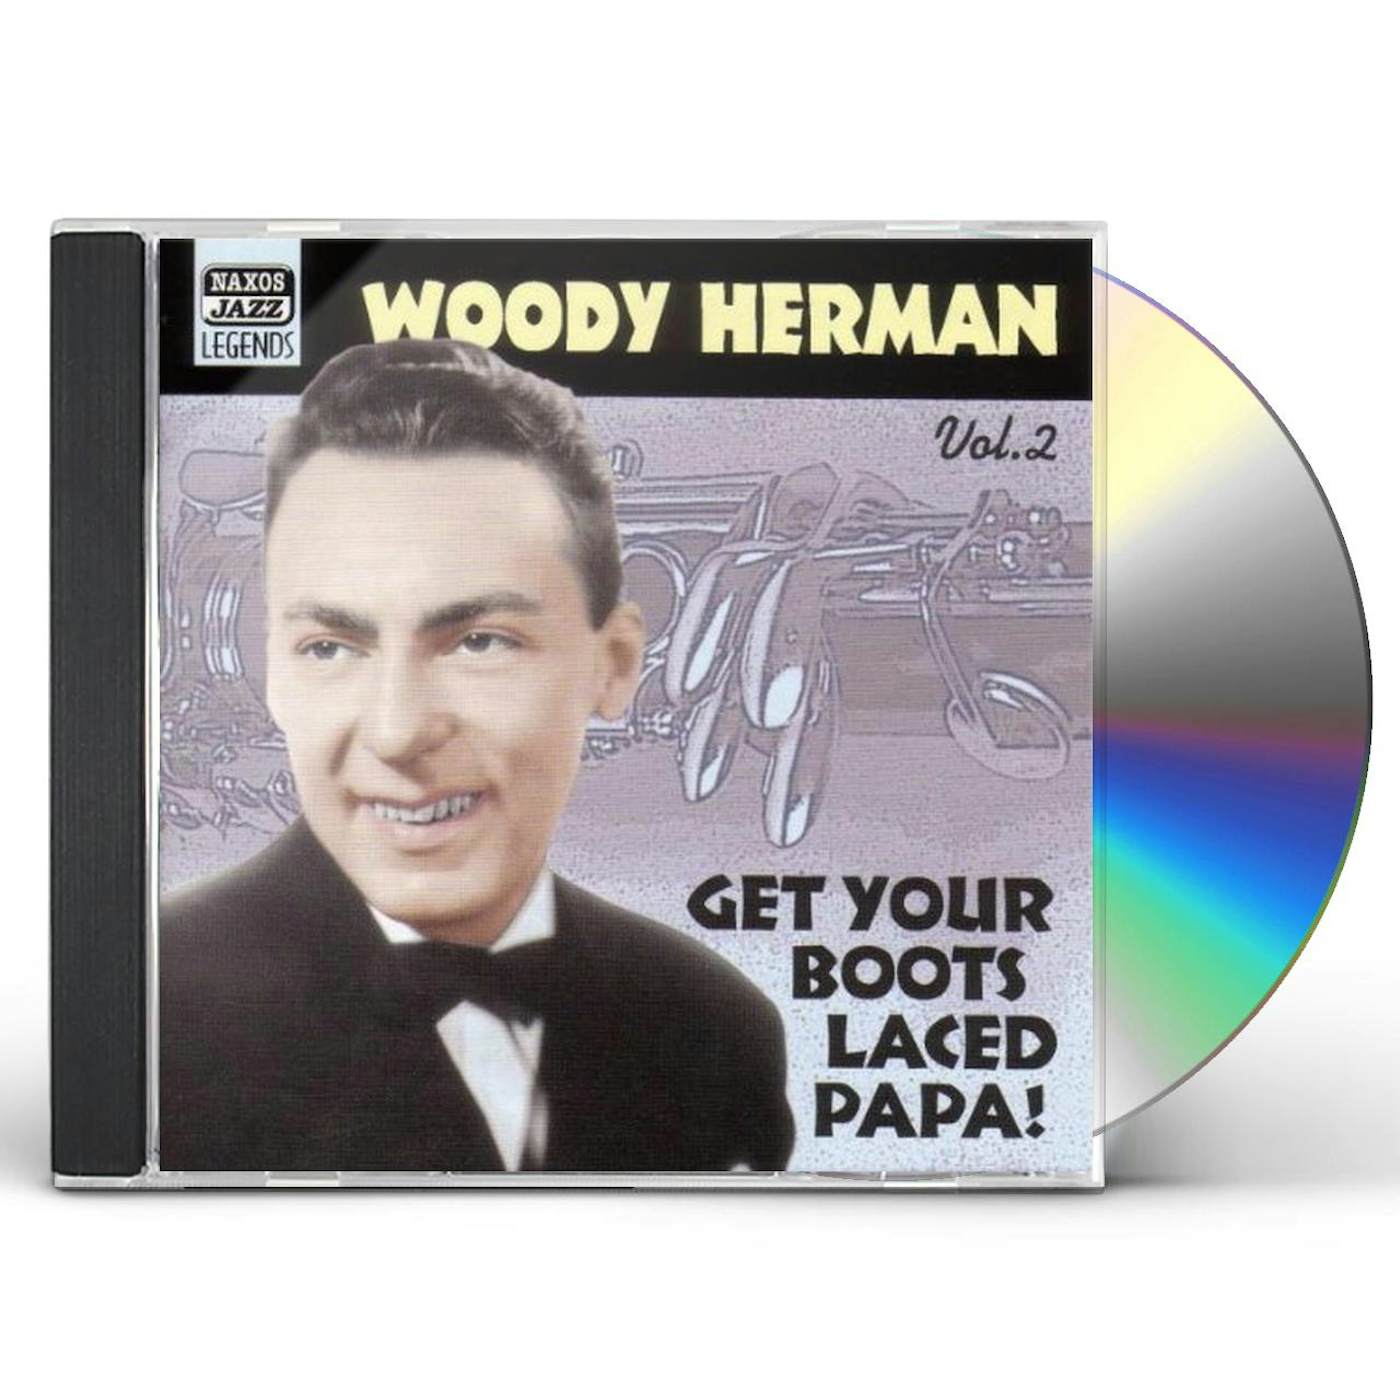 Woody Herman VOL. 2-GET YOUR BOOTS LACE PAPA CD